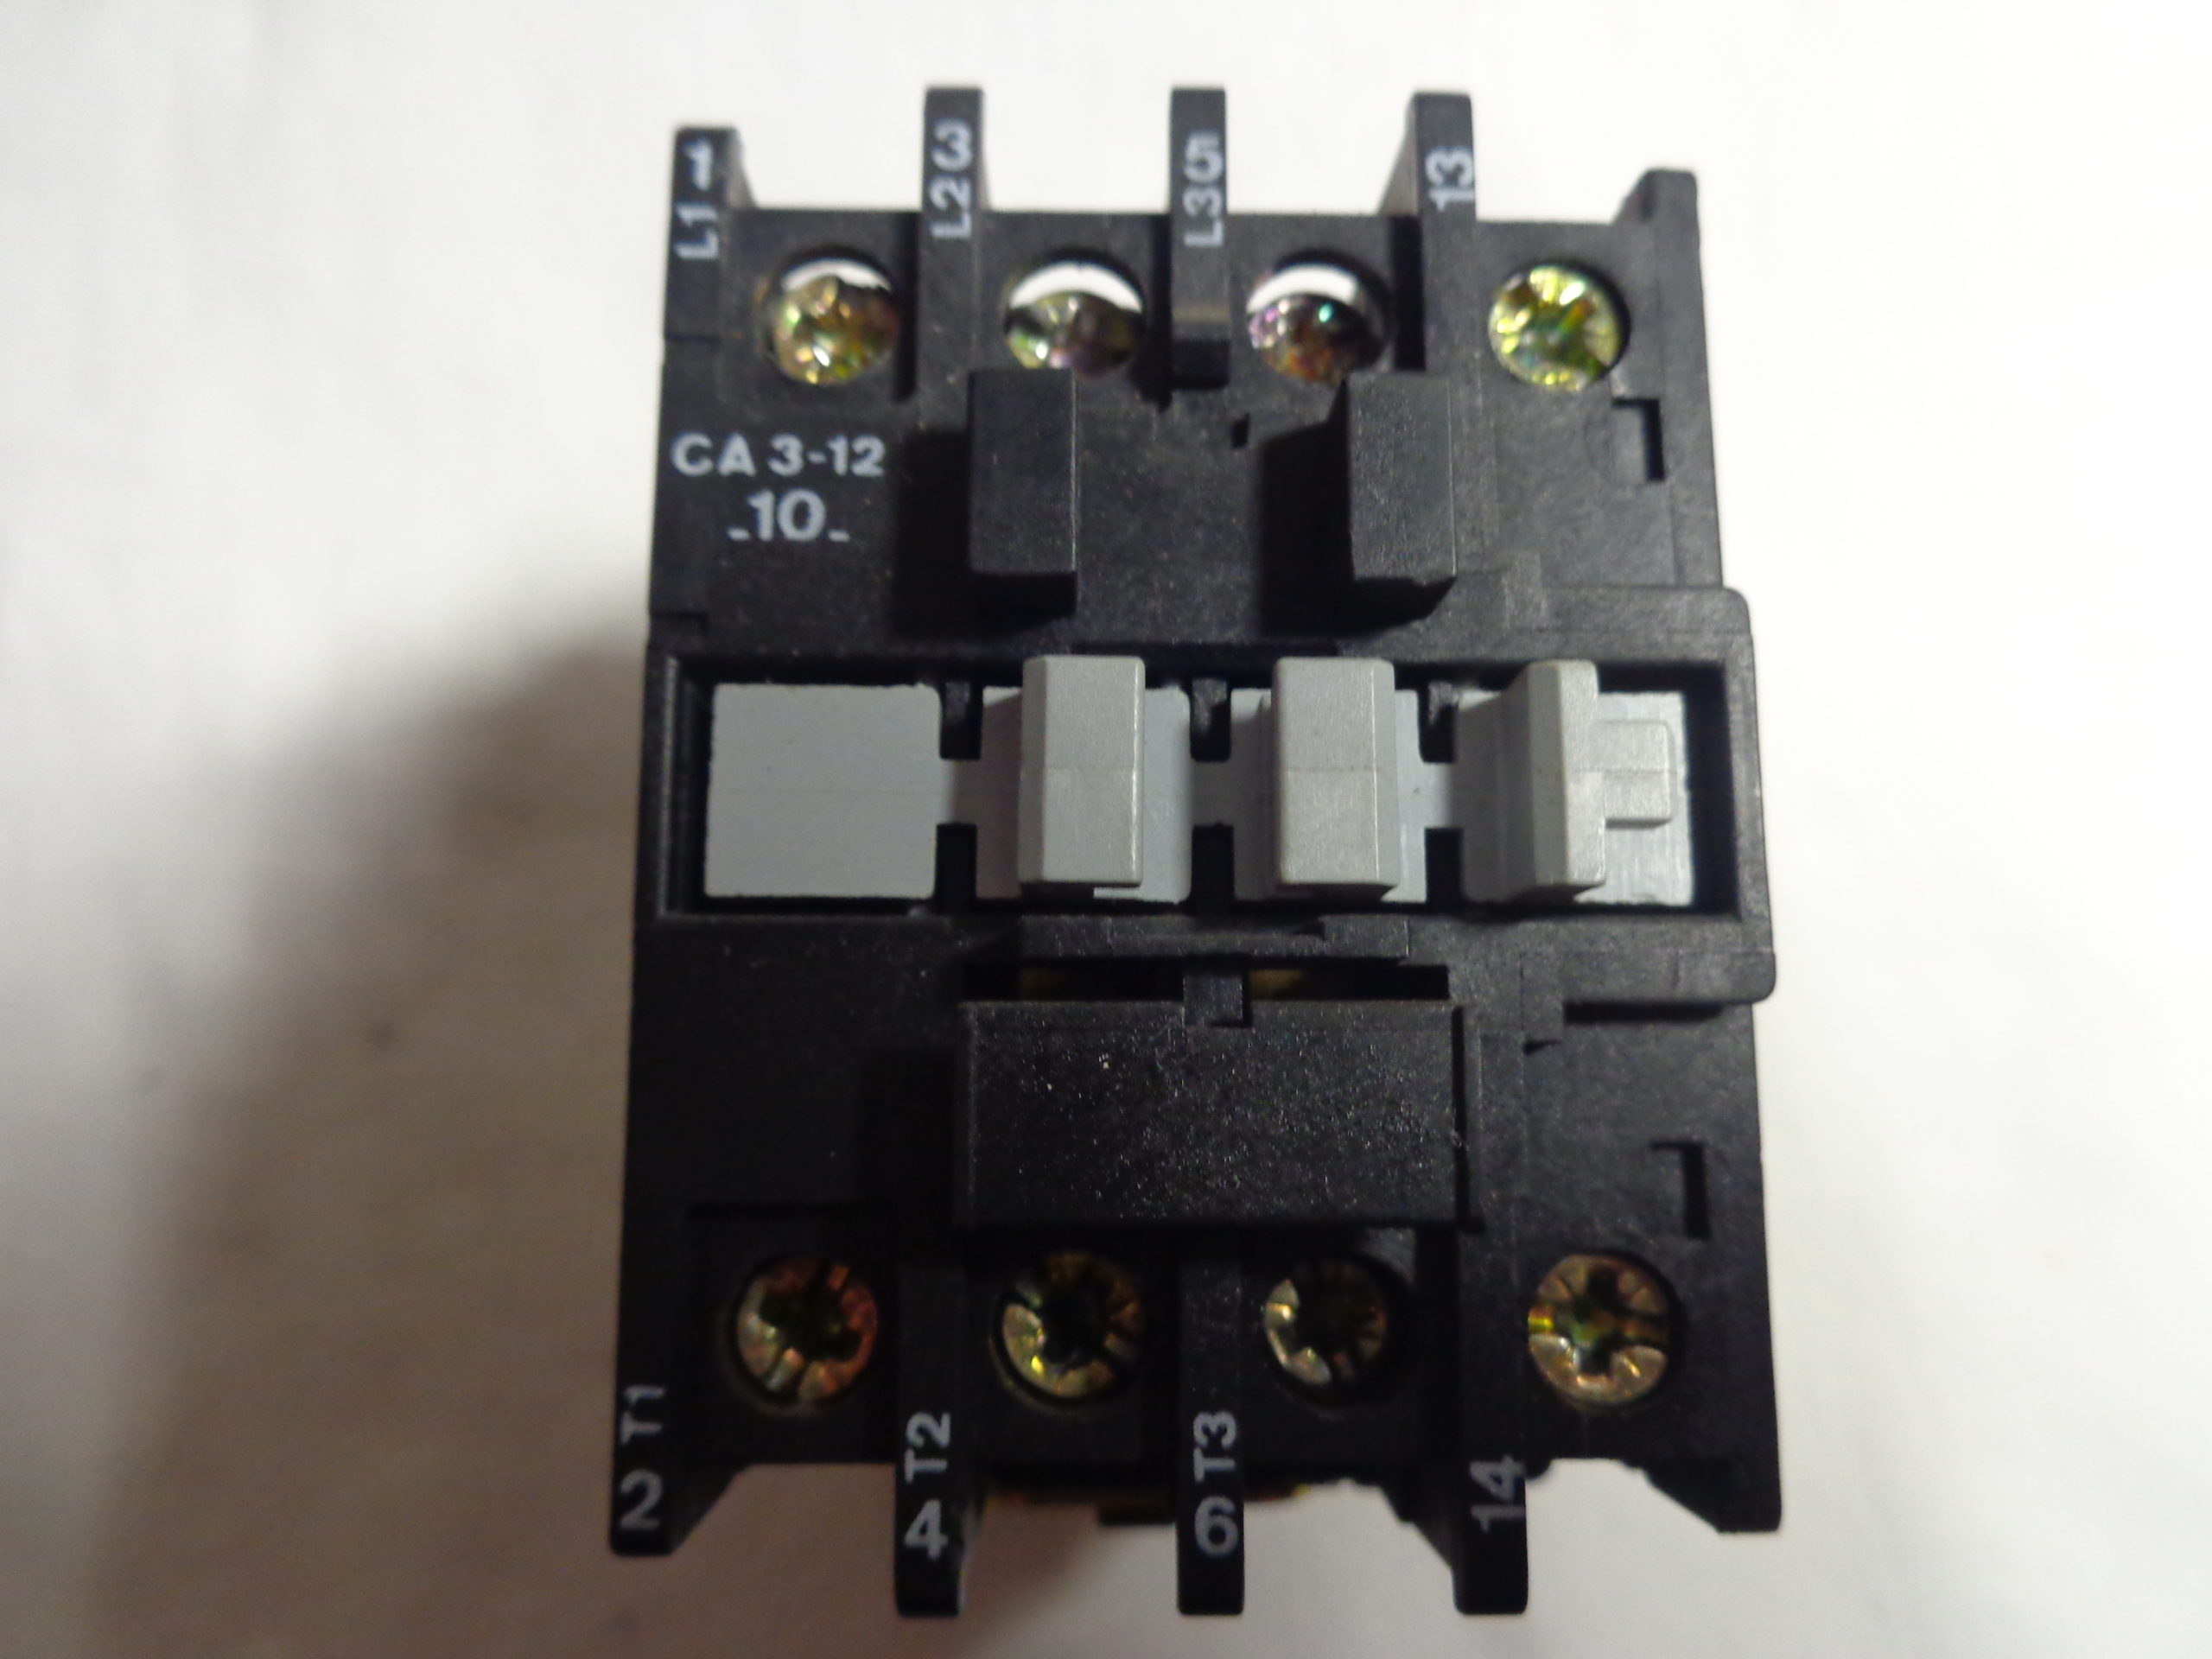 Schuh CT 3-12 Relay w/ CA 3-9-10 Contactor CA 3-P Auxiliary Contact Sprecher 